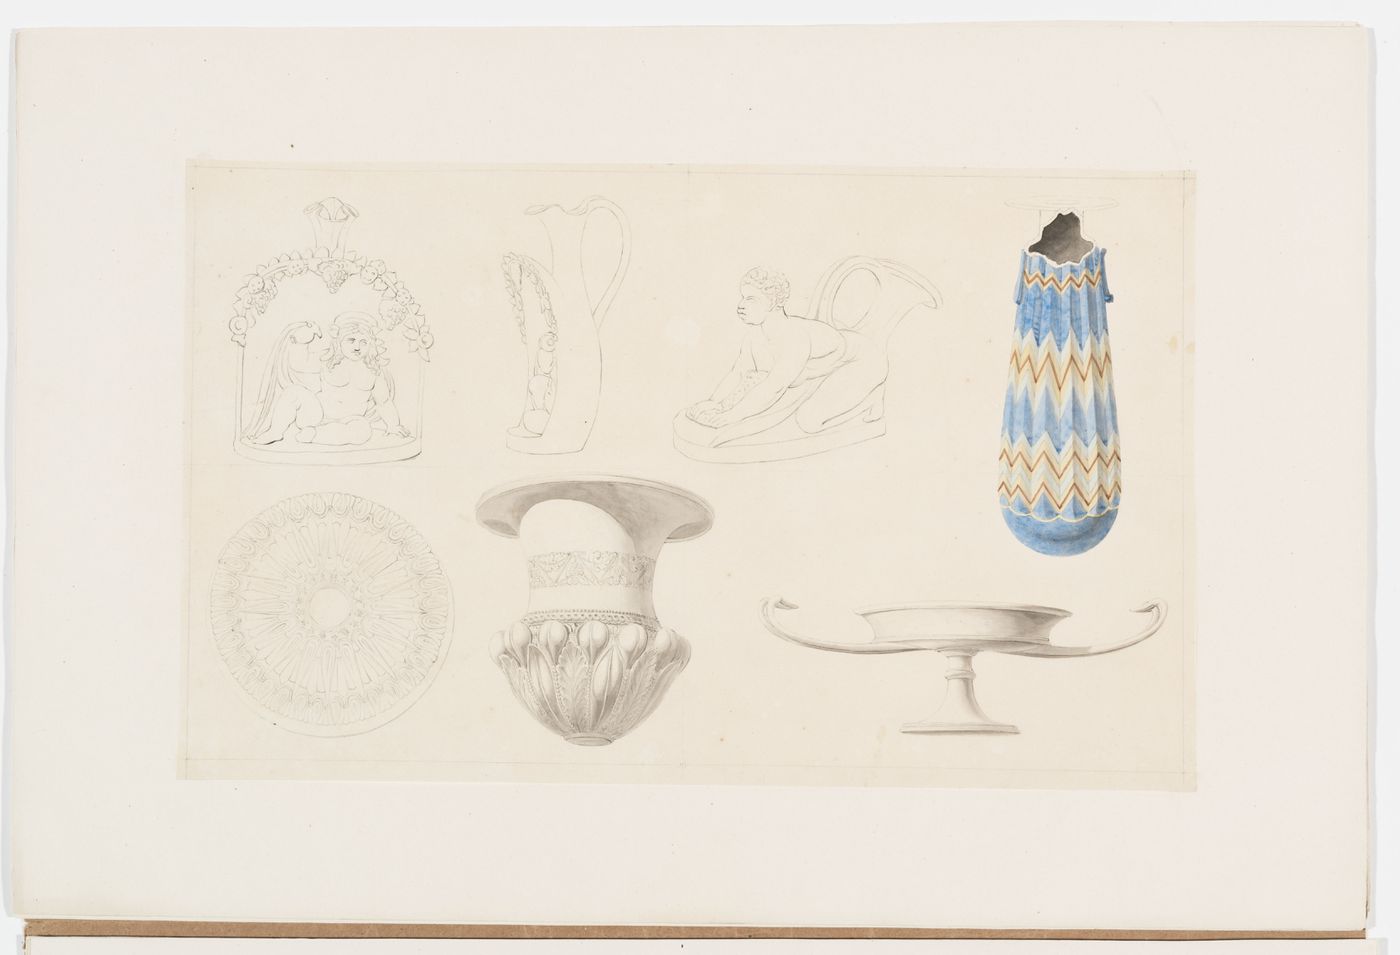 Drawing of two vases decorated with foliage and grotesques, a jug decorated with grotesques, a vase decorated with a geometric pattern, an undecorated kylike, an urn decorated with foliage, and a rosette or the underside of a vase